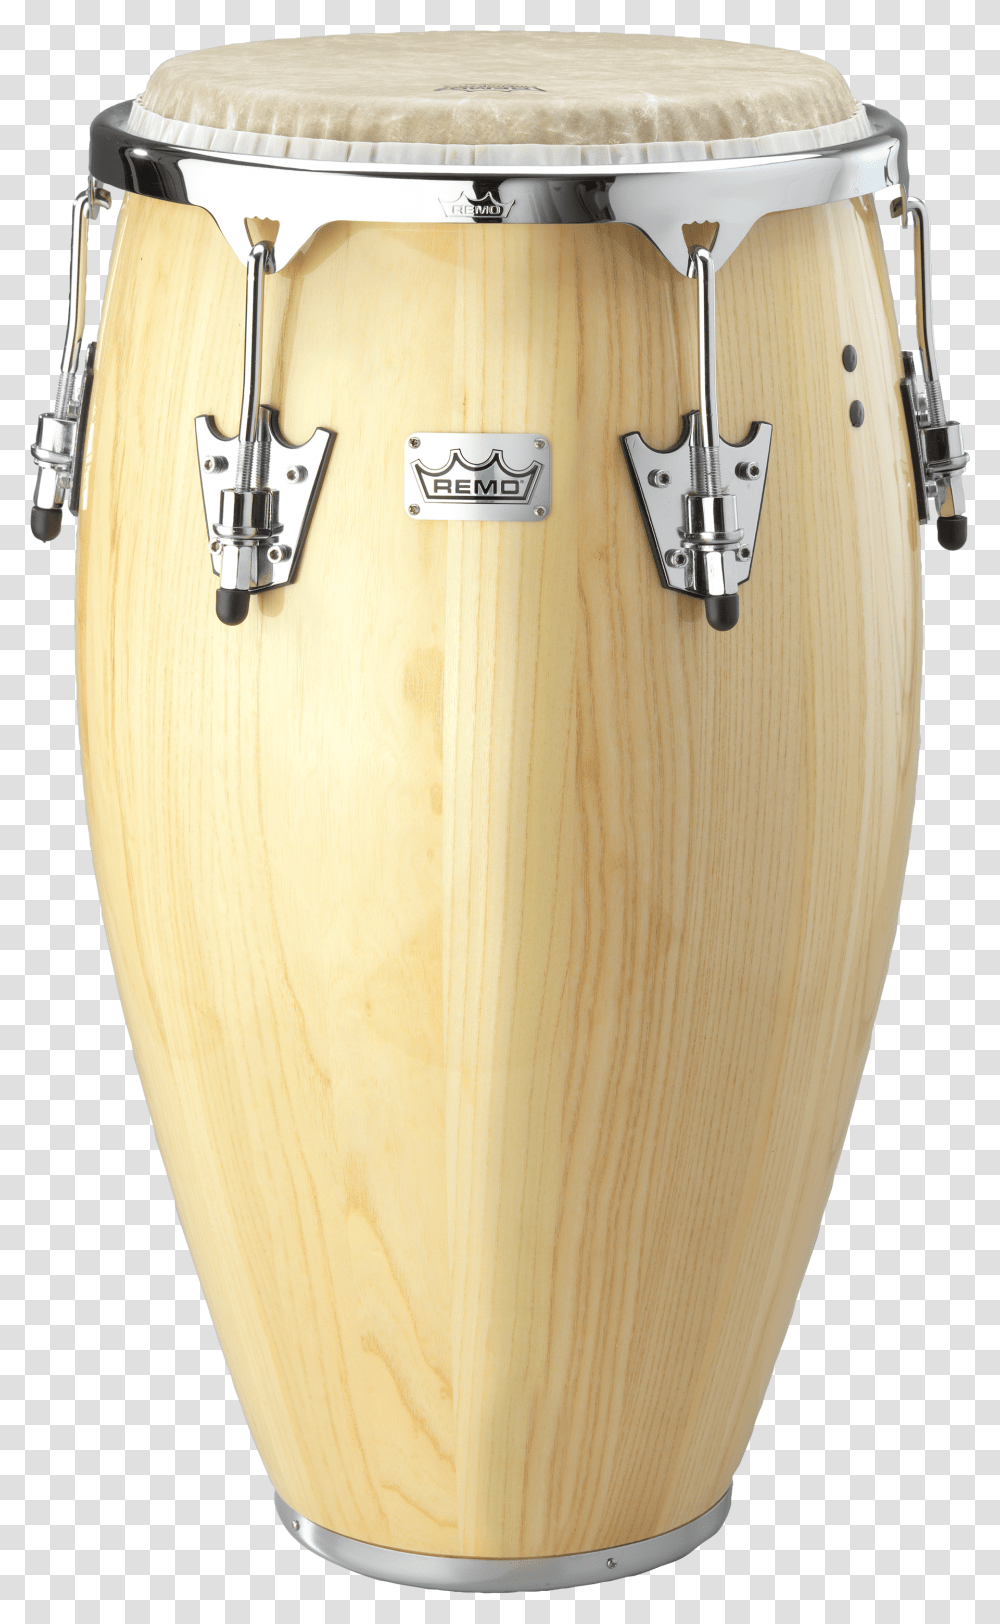 Remo Crown Percussion Conga Drum Natural Conga, Lamp, Musical Instrument, Leisure Activities Transparent Png